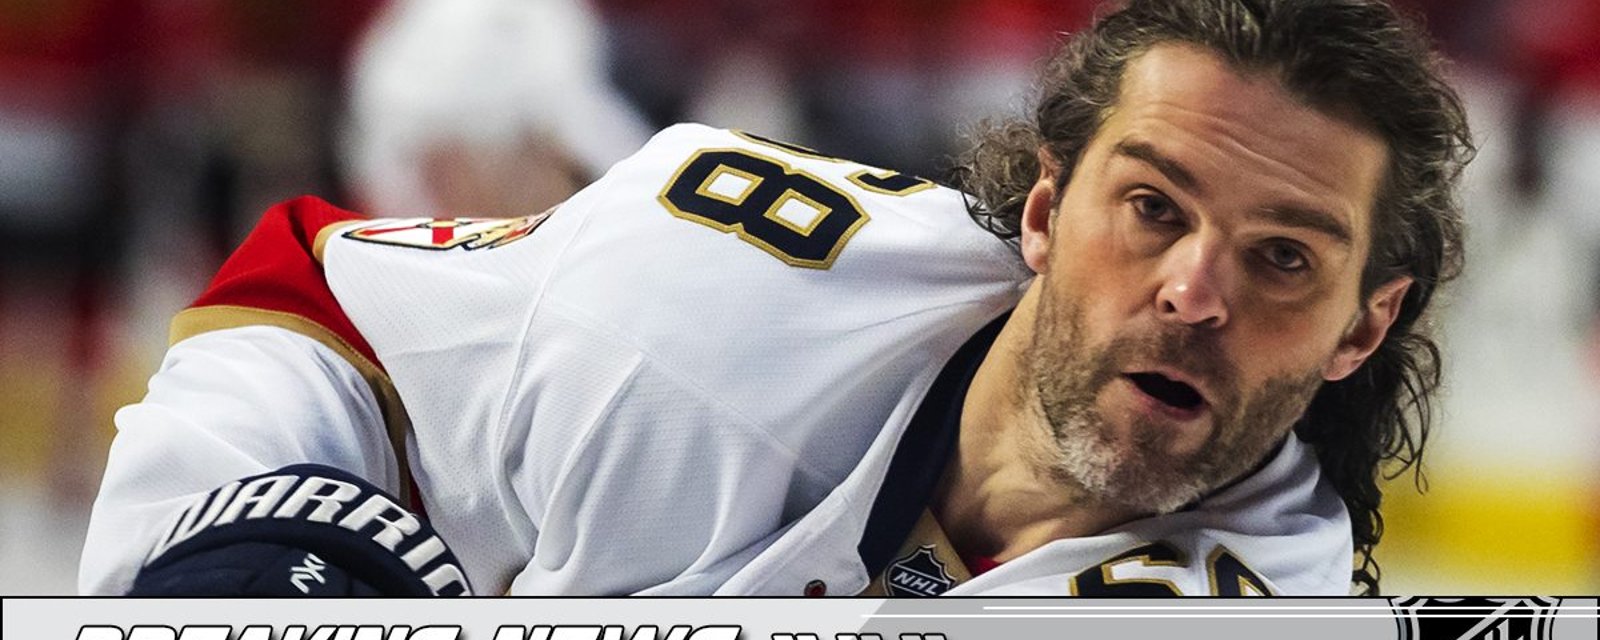 Breaking: Jagr's agent has had talks with one of the NHL's biggest teams.